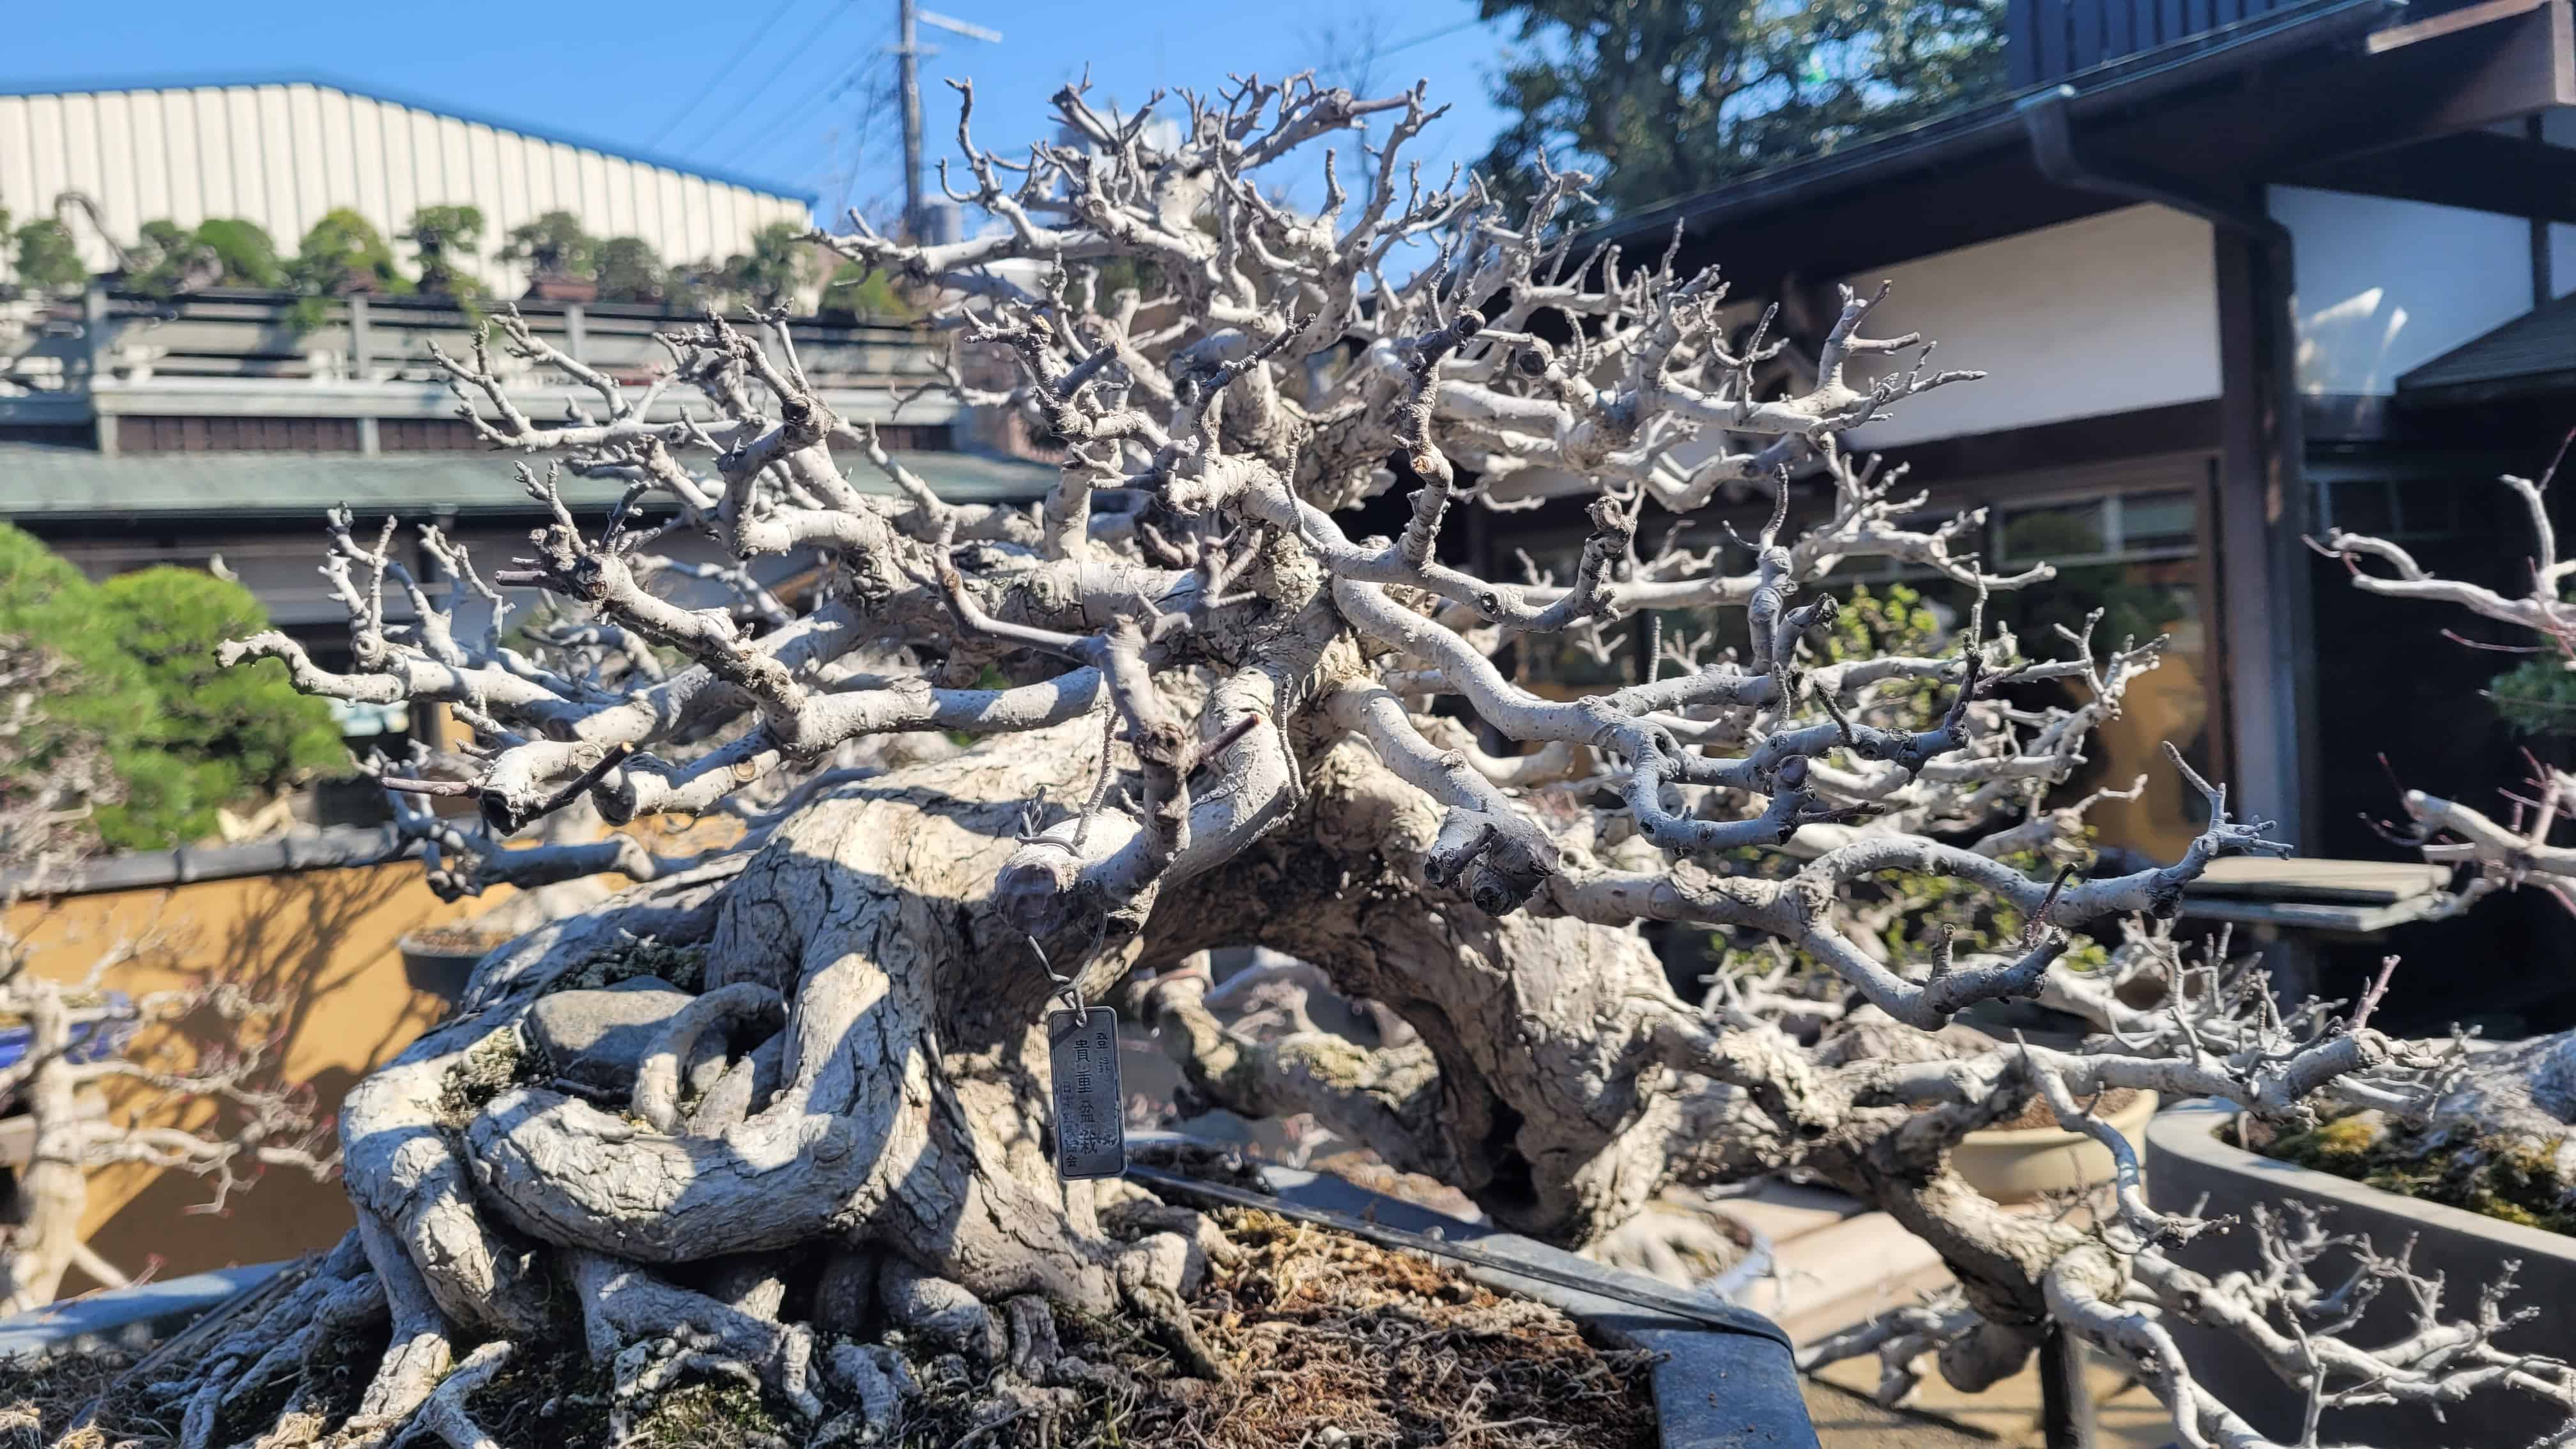 An interesting unknown bonsai tree from unknown in Japan